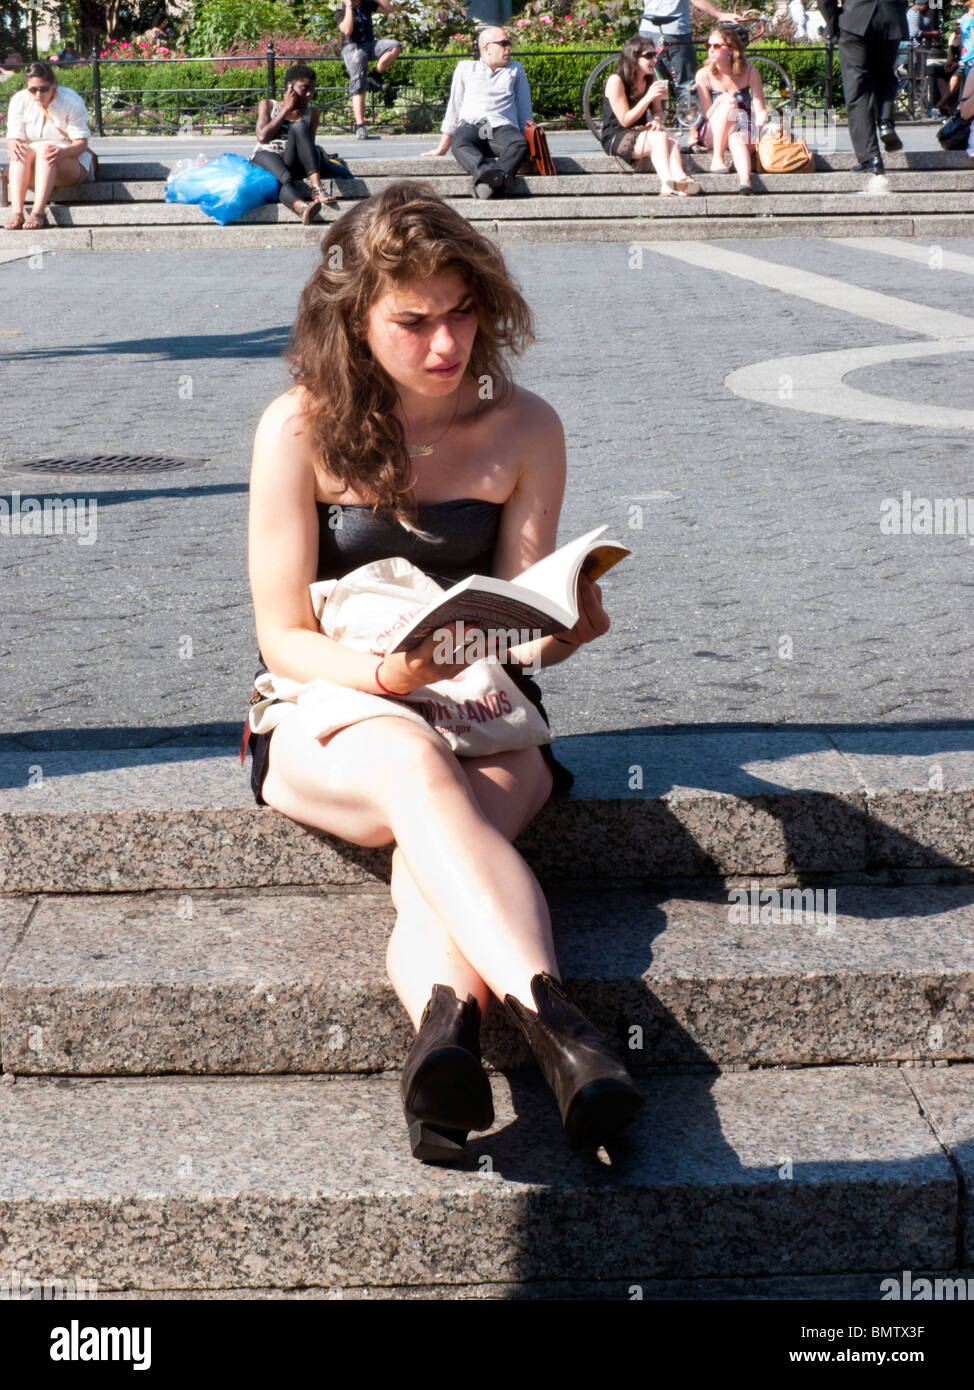 pretty young woman sitting on plaza steps sunning & reading a book on beautiful day in Union Square Manhattan New York City Stock Photo